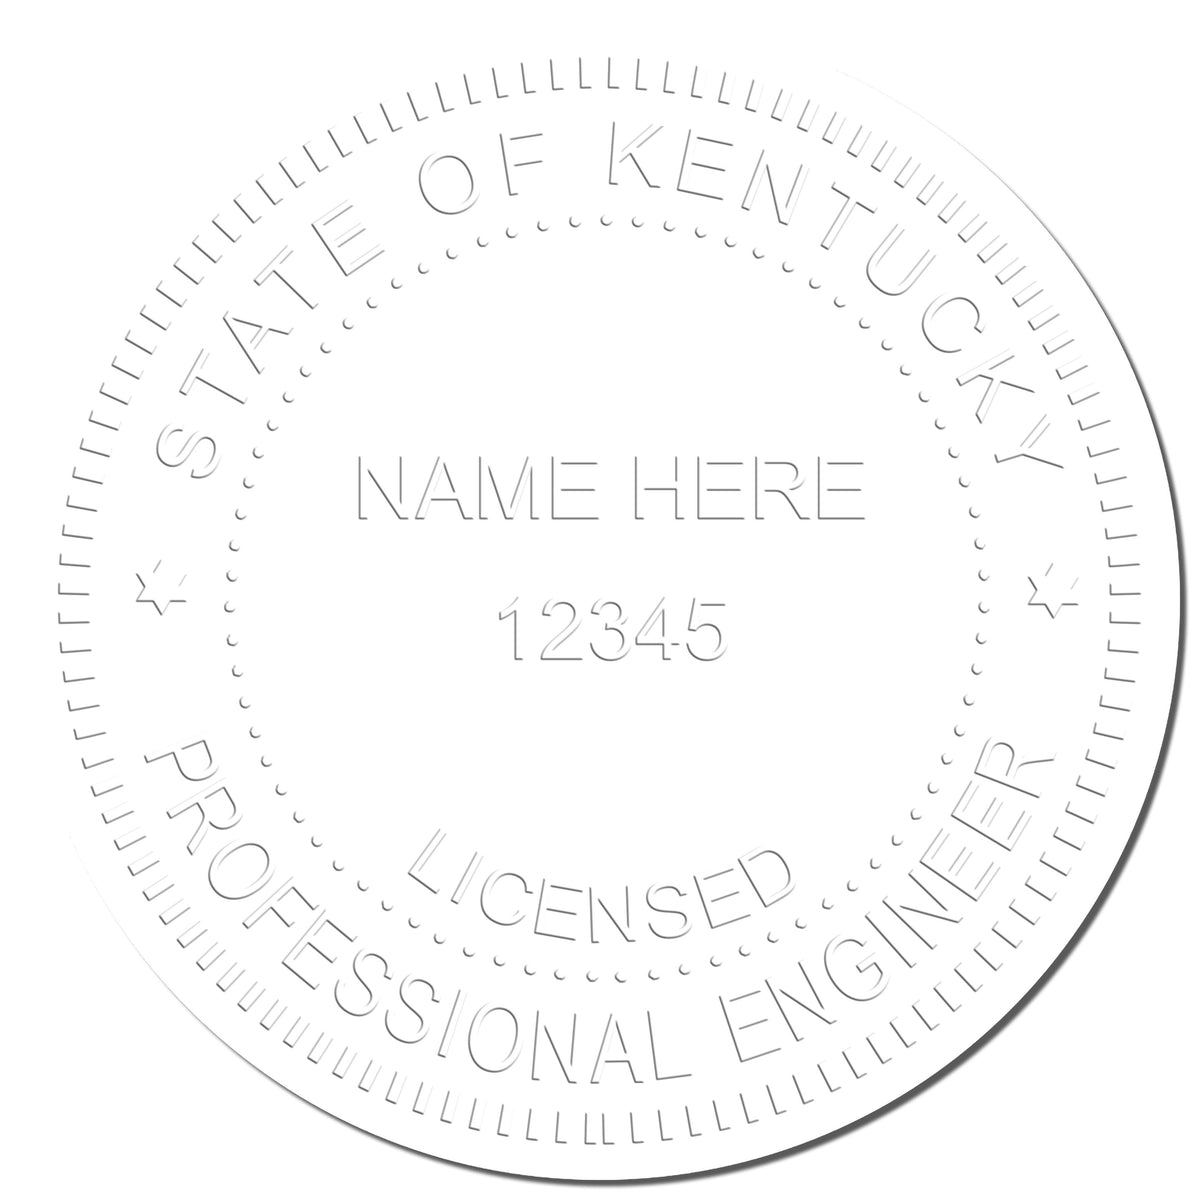 This paper is stamped with a sample imprint of the Hybrid Kentucky Engineer Seal, signifying its quality and reliability.